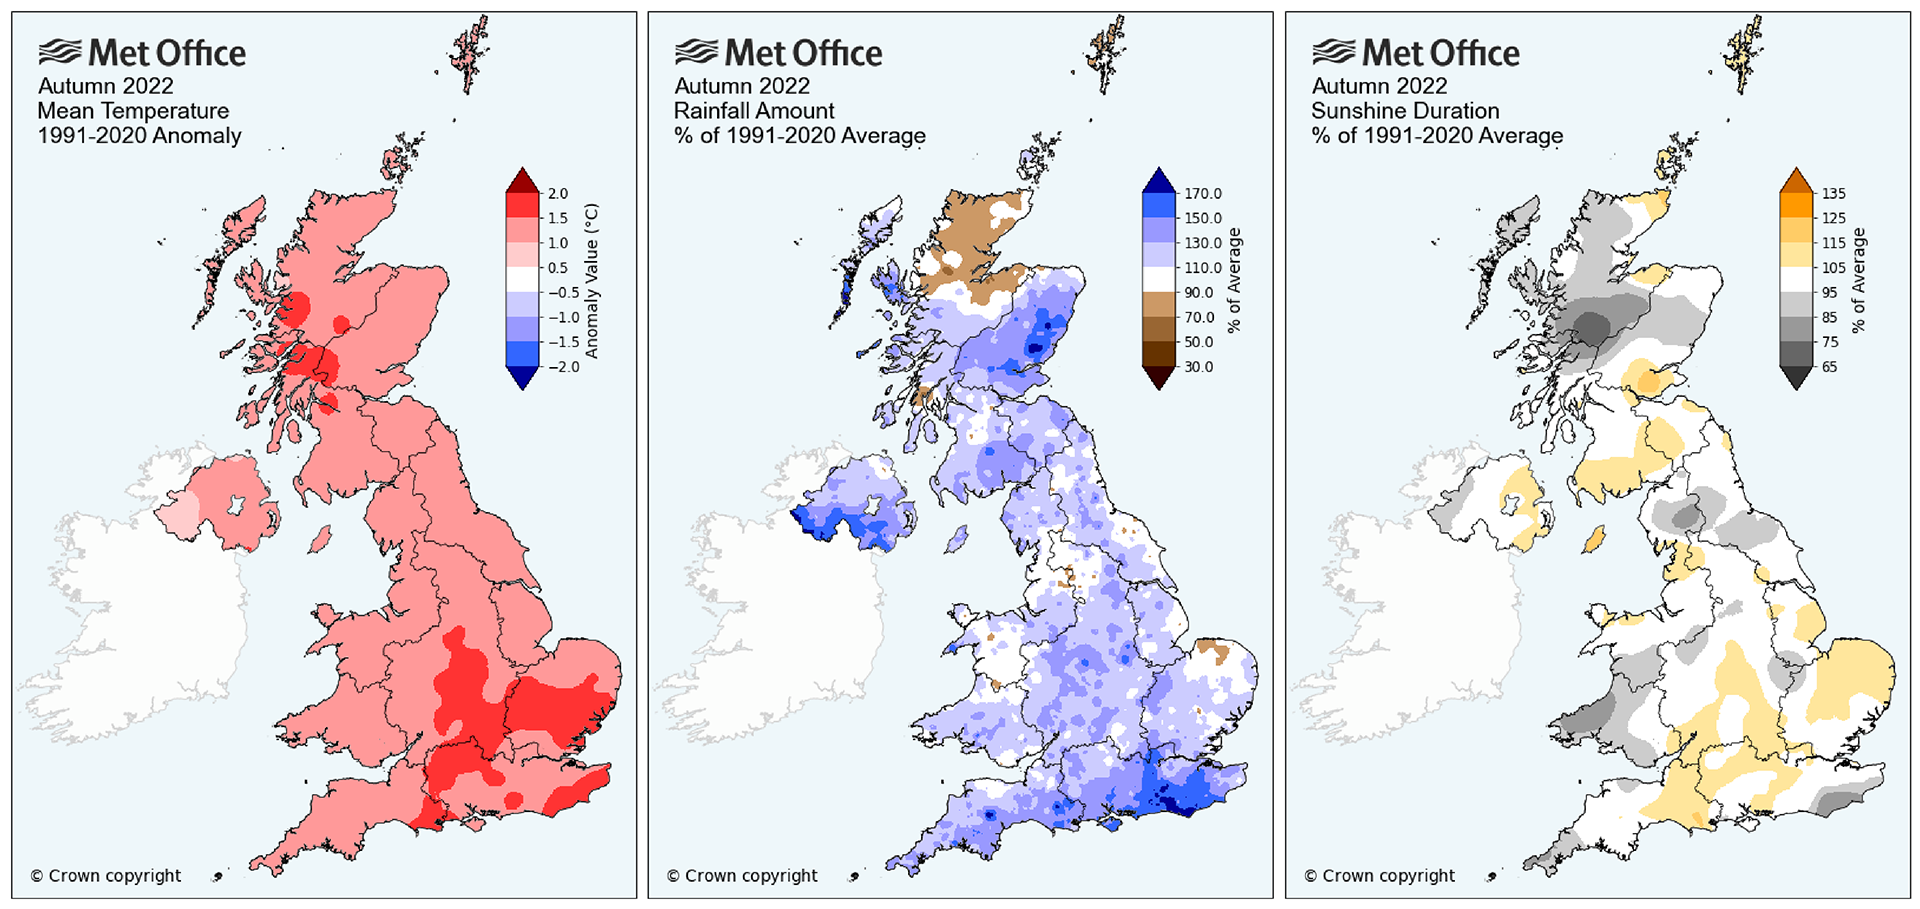 Maps showing above average temperatures for the UK in Autumn, as well as above average rainfall and near-average sunshine